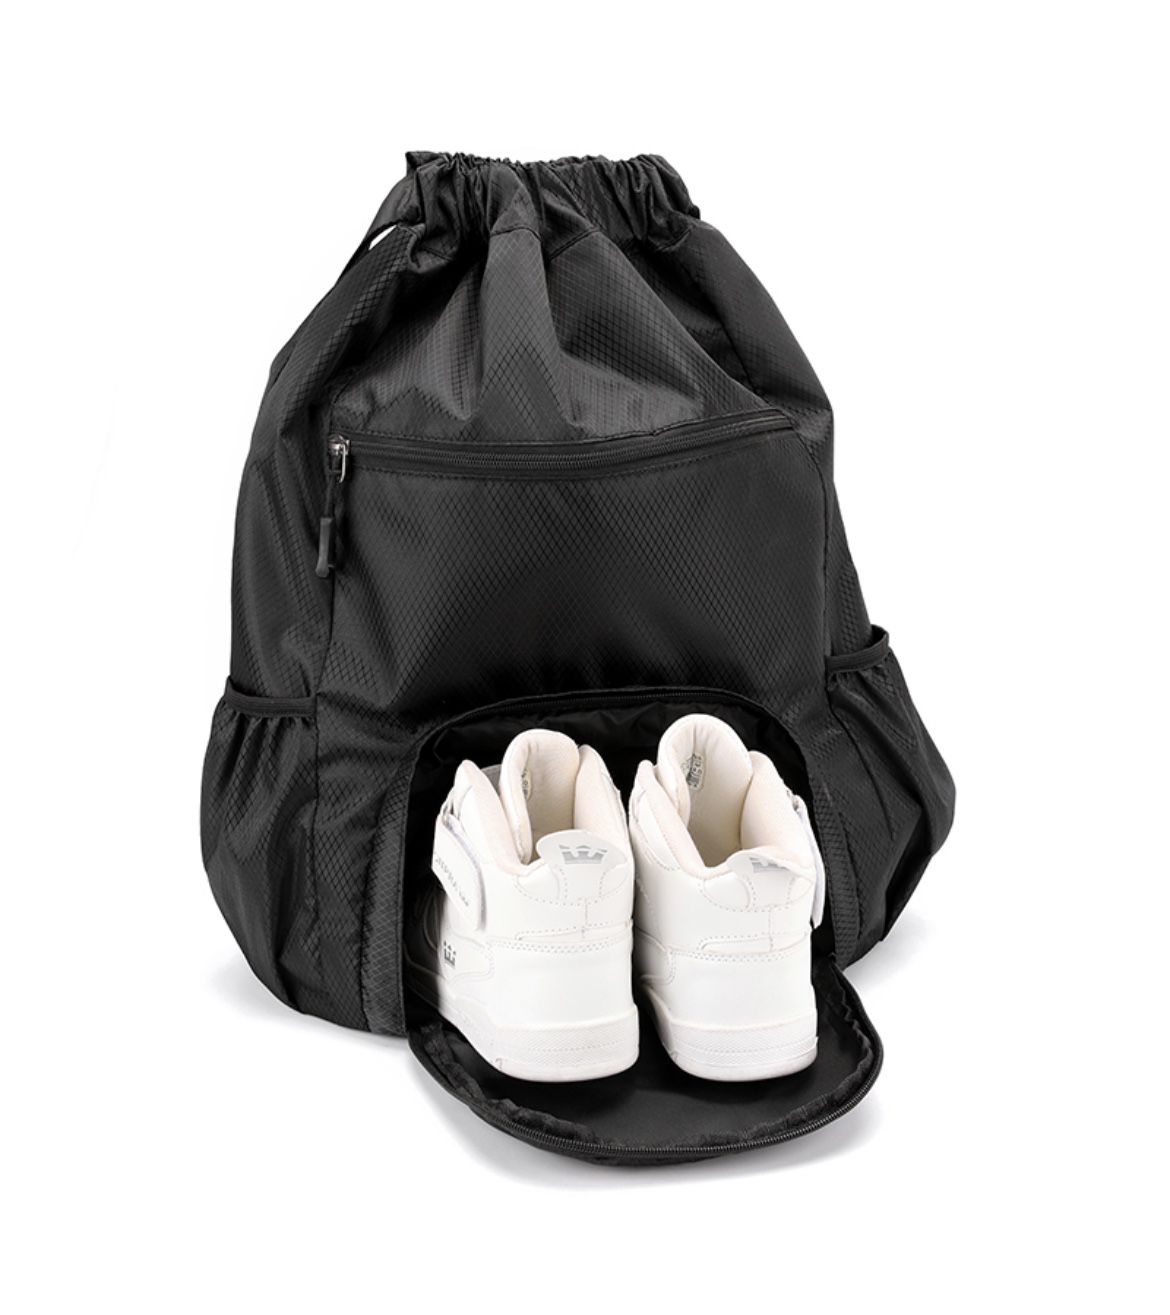 Drawstring Gym Backpack Small Fitness Workout Sports Duffle Bag with Multi Pocket & Shoes Compartment Black